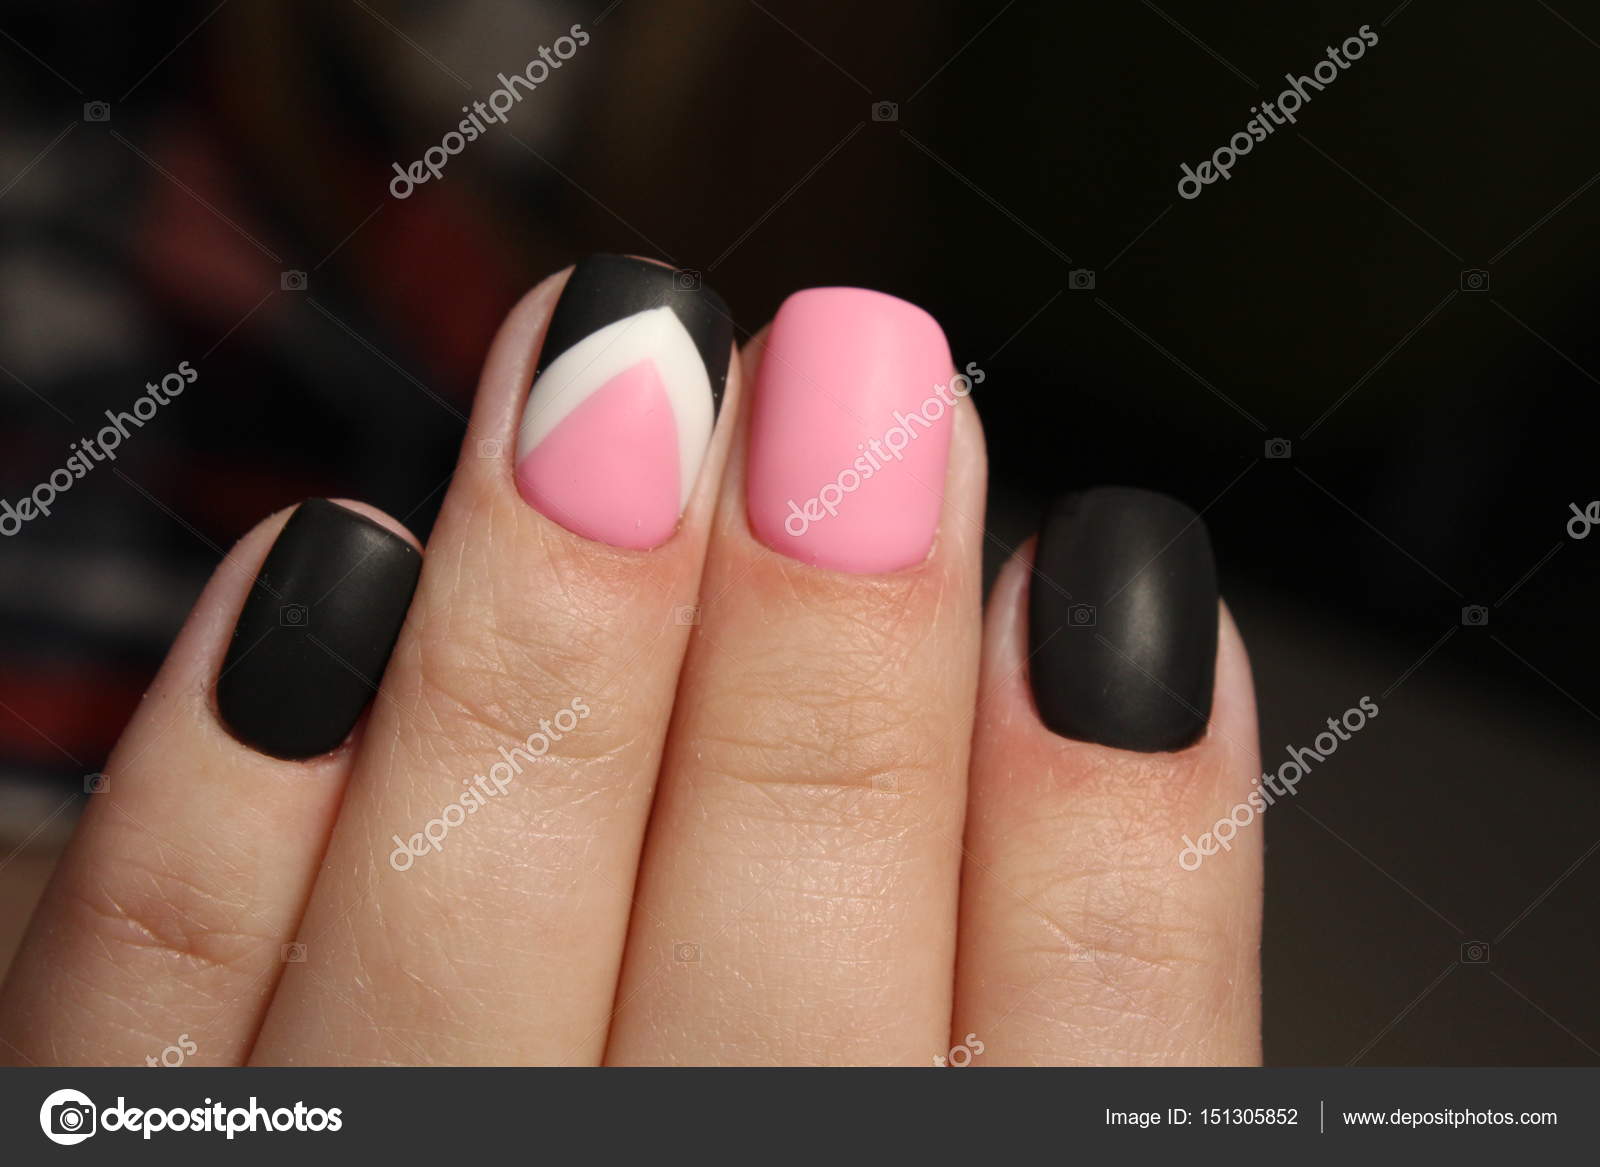 Awesome Contrast of Pink & Black Nail Designs for 2019 | Voguetypes | Nail  art designs, Nail art, Black nail designs